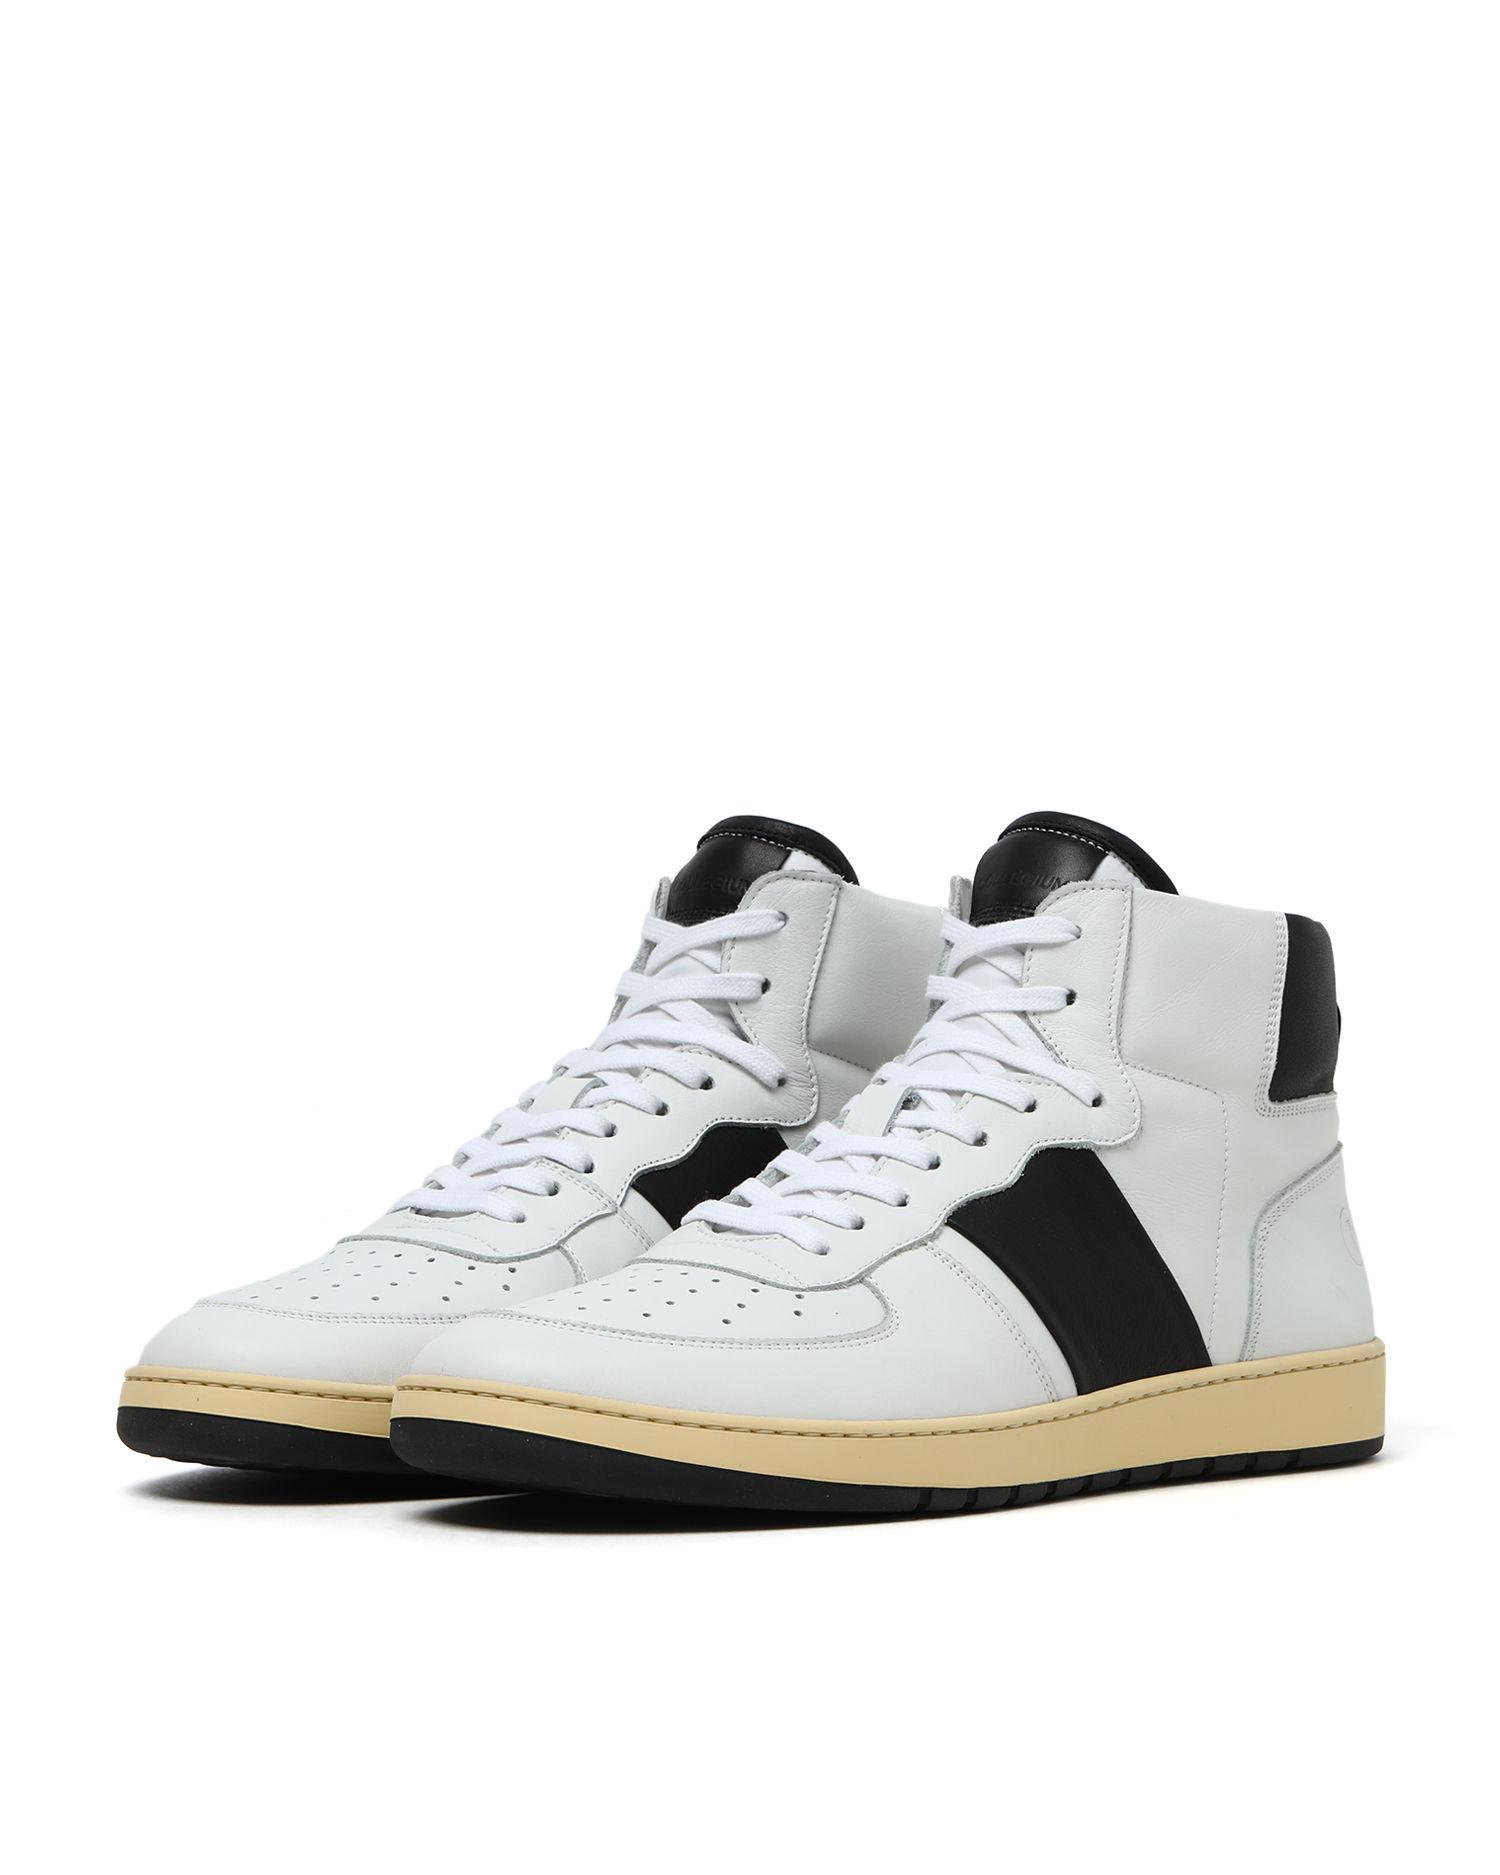 The Destroyer high top sneakers by COLLEGIUM